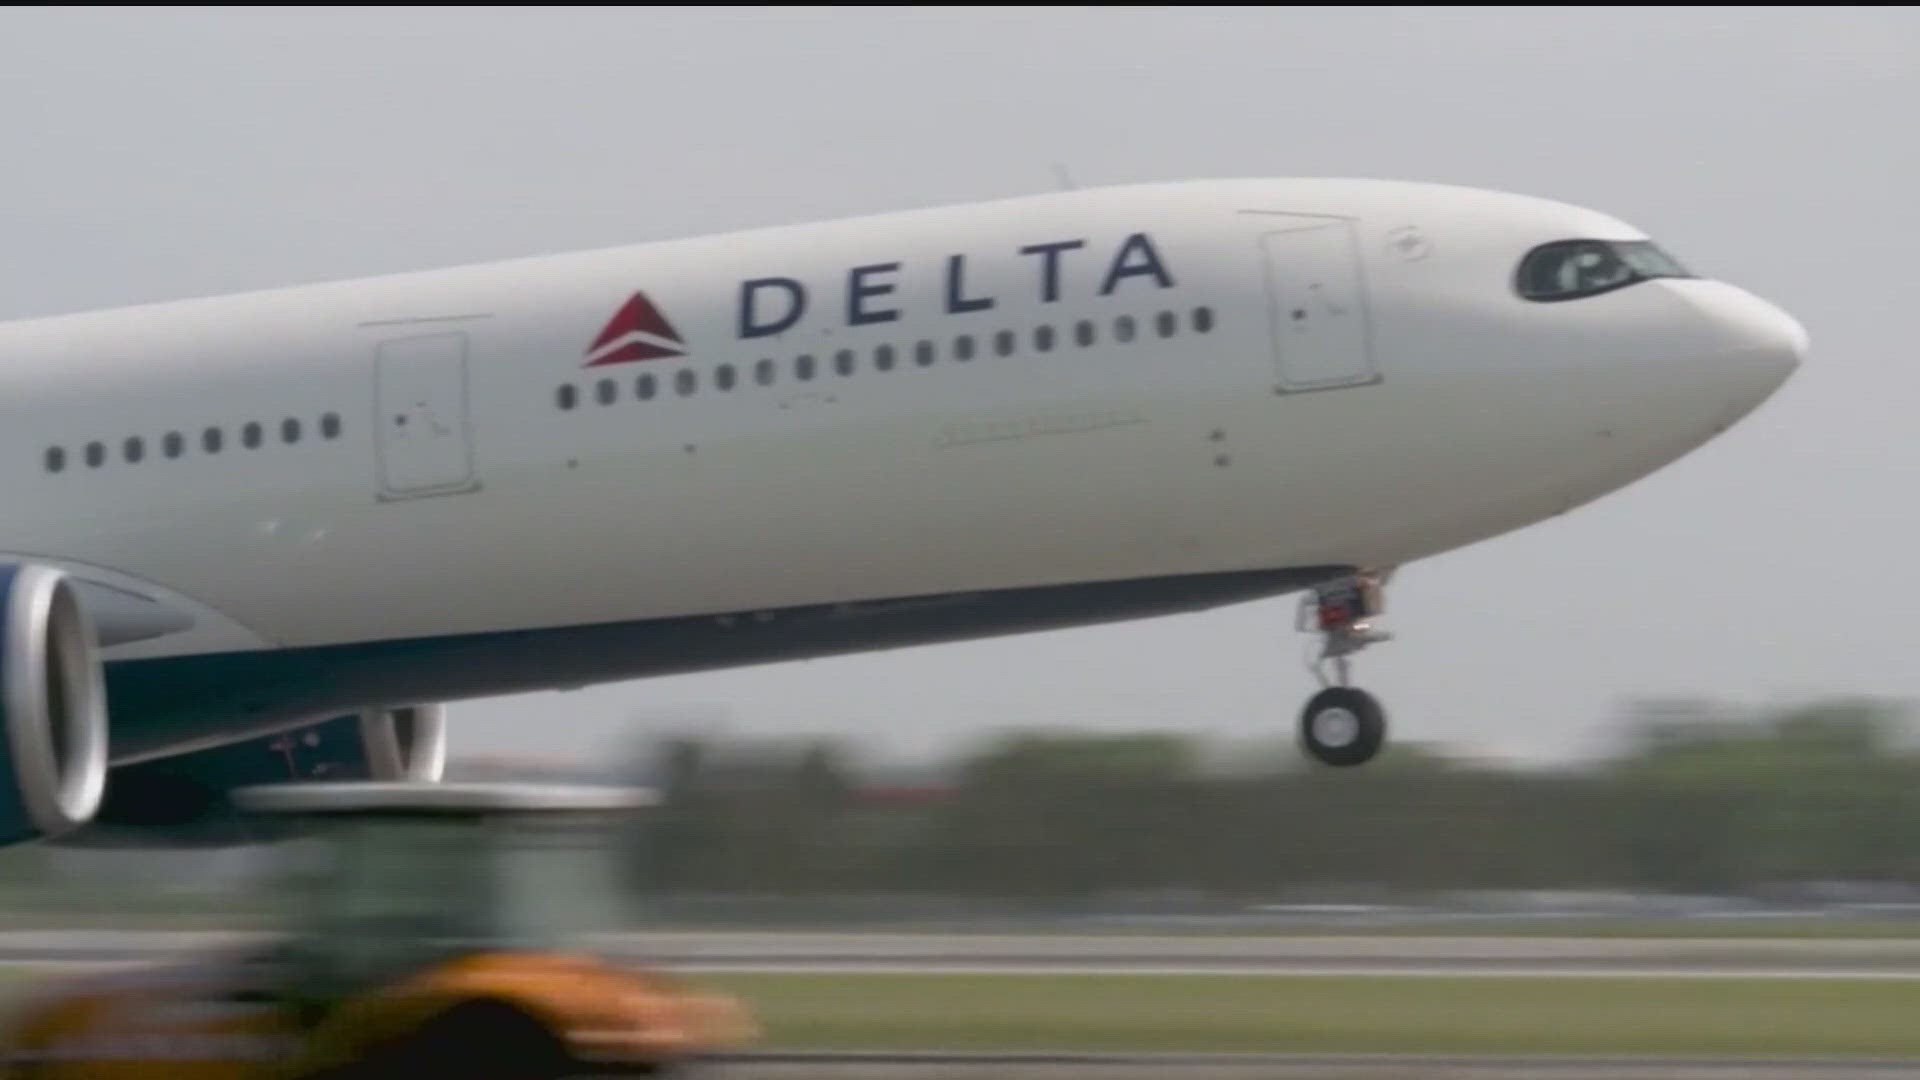 The pay raises come as Delta braces for another attempt by a union to represent its flight attendants.